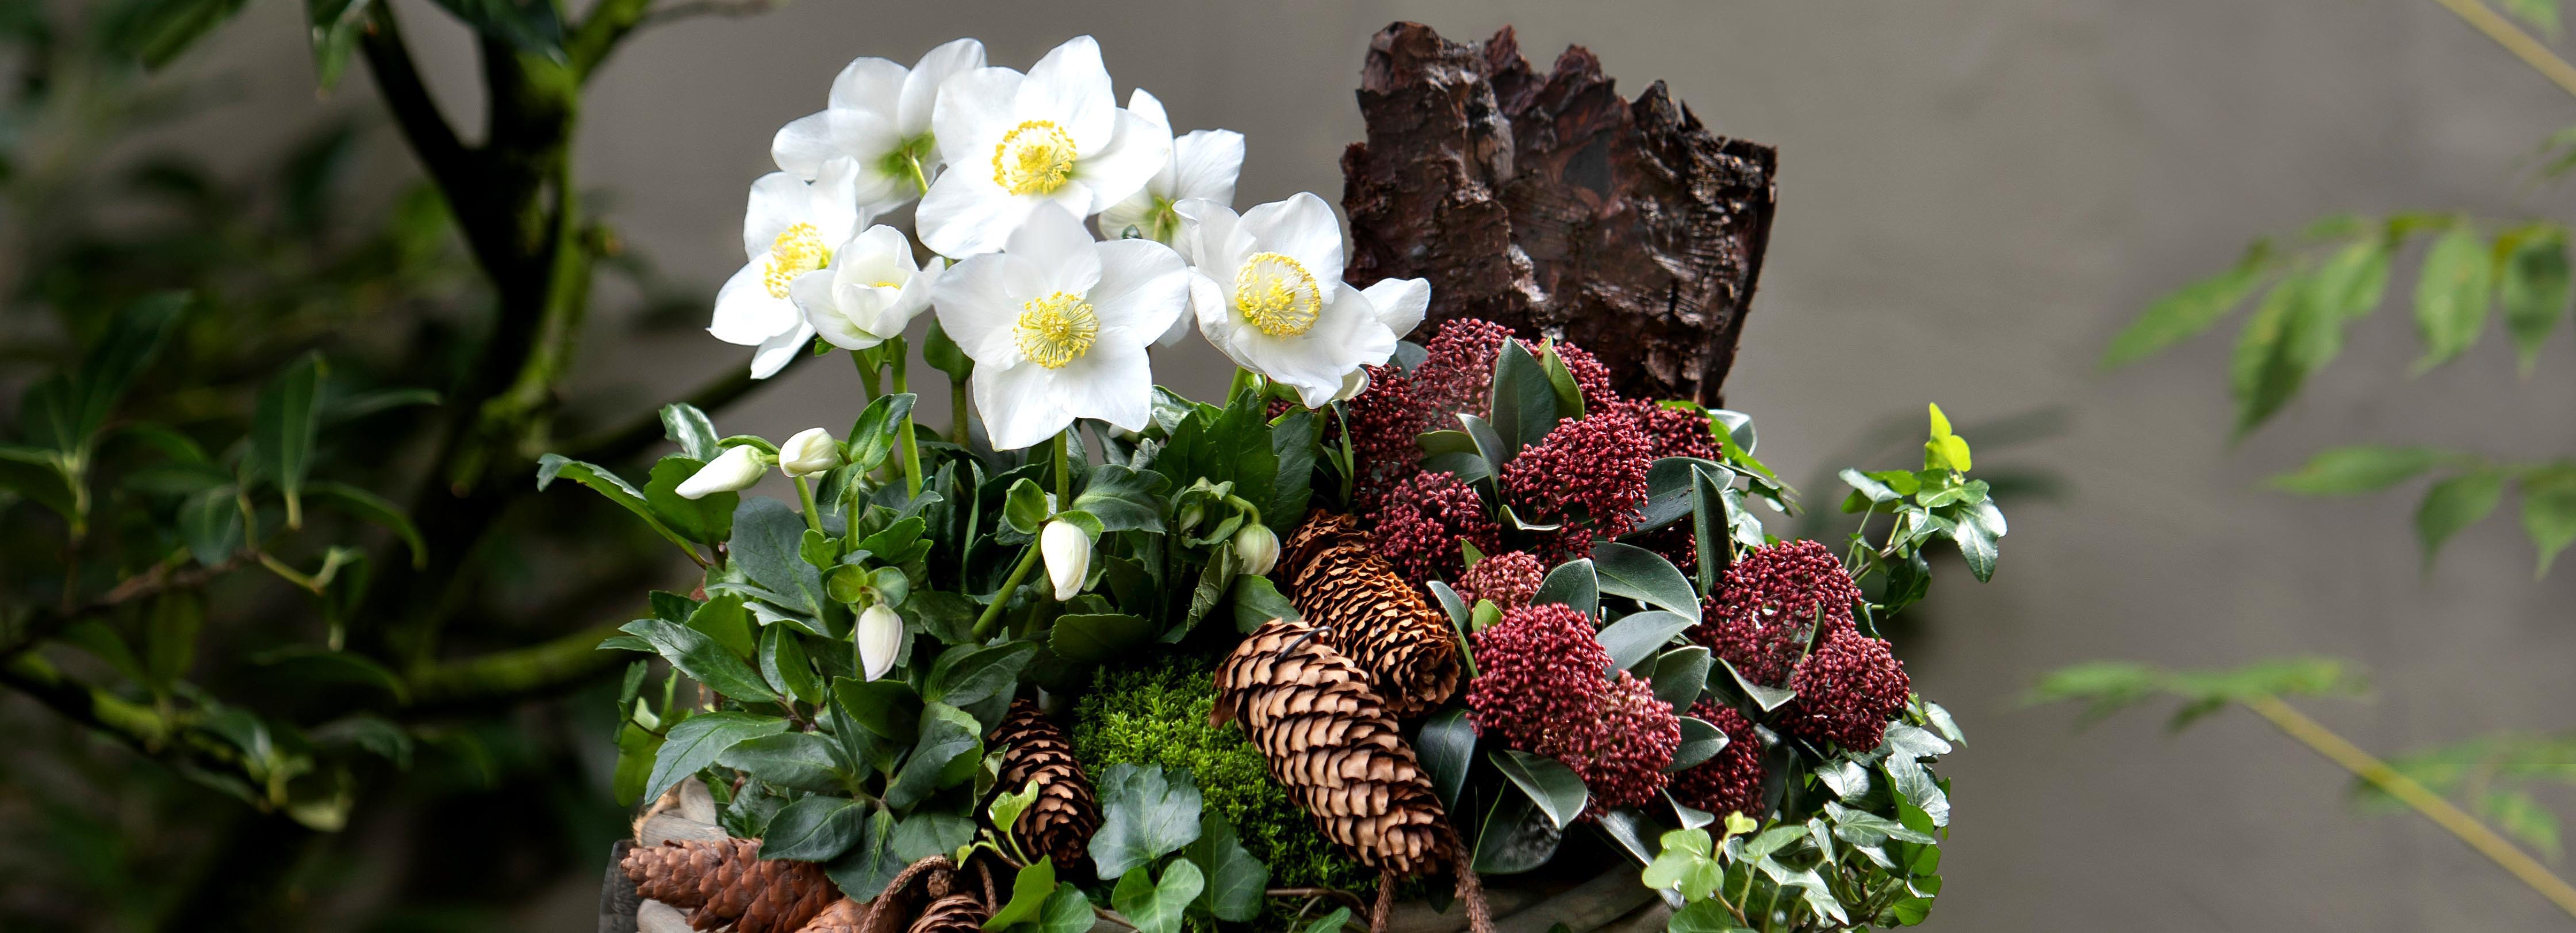 With white-flowered Christmas Roses, we create a little hope and brightness even in the dark time of year